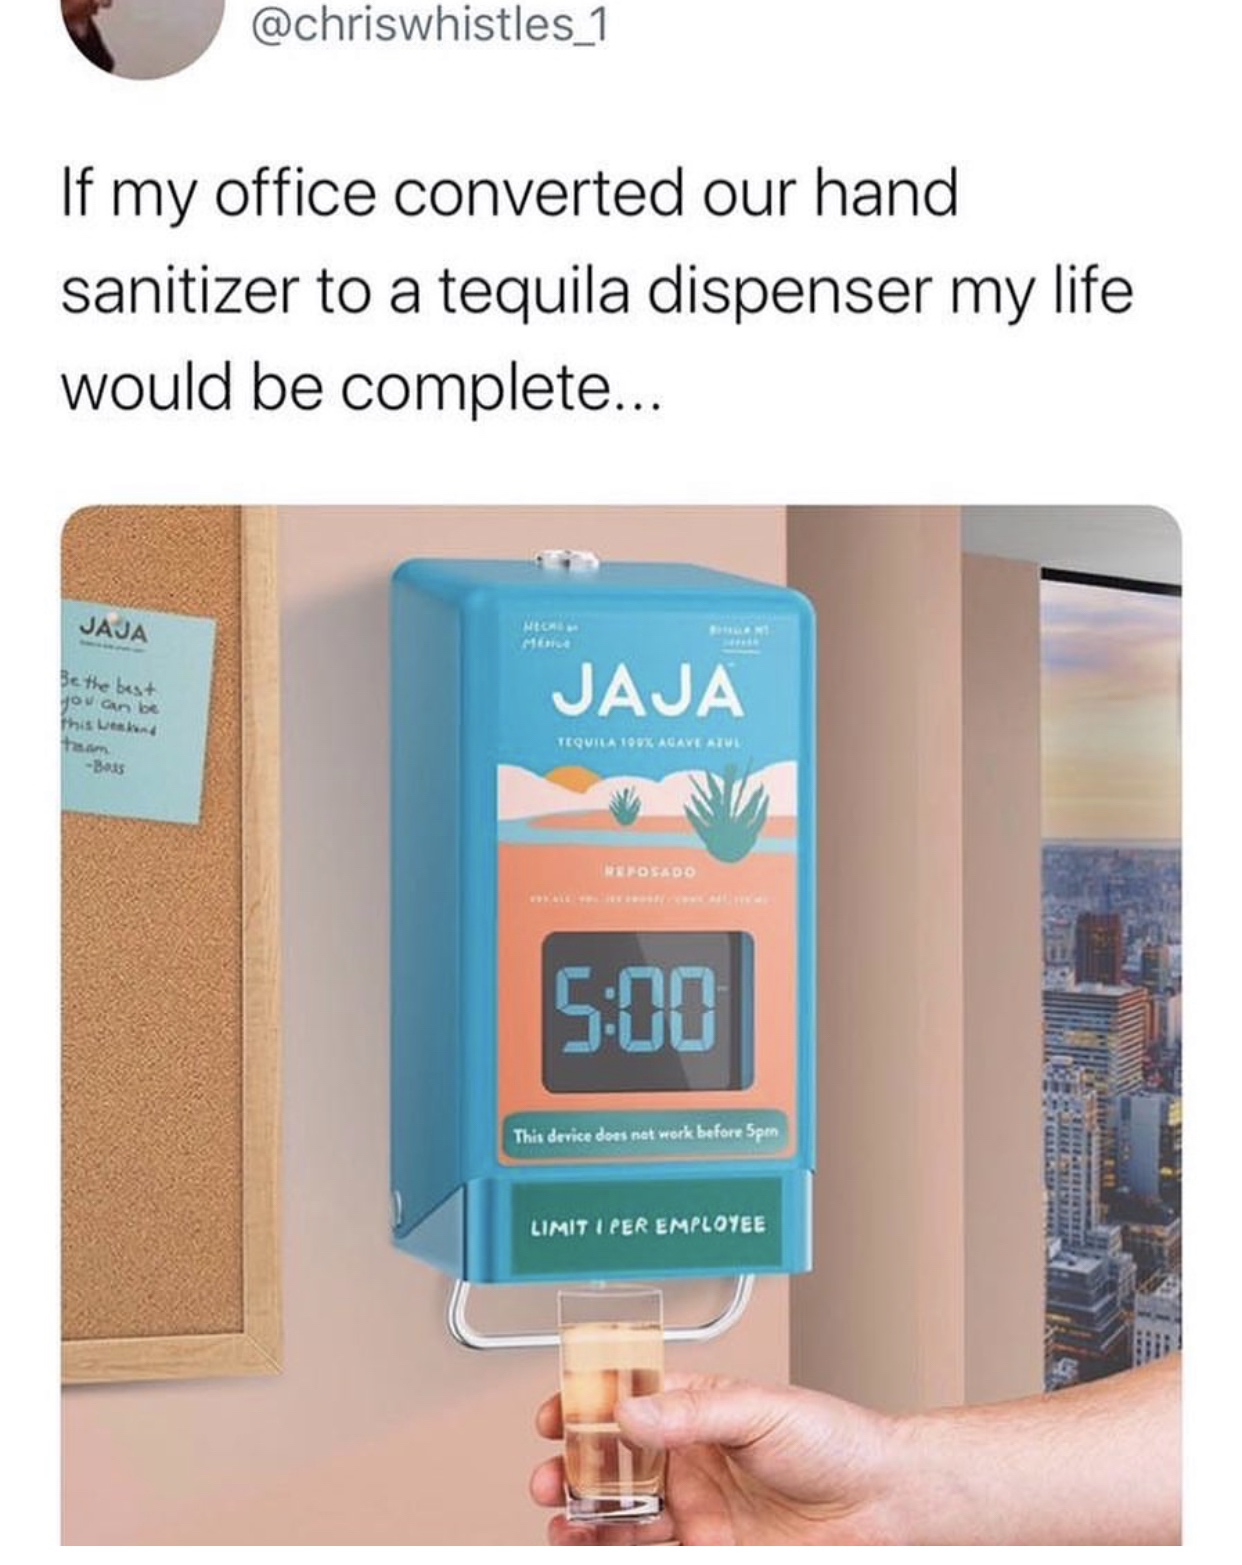 If my office converted our hand sanitizer to a tequila dispenser my life would be complete... Jaja Mer Be the best you in be Jaja This Week tam Tequila 100X Alave Tw Bas Reposado This device does not work before Spen Limit I Per Employee